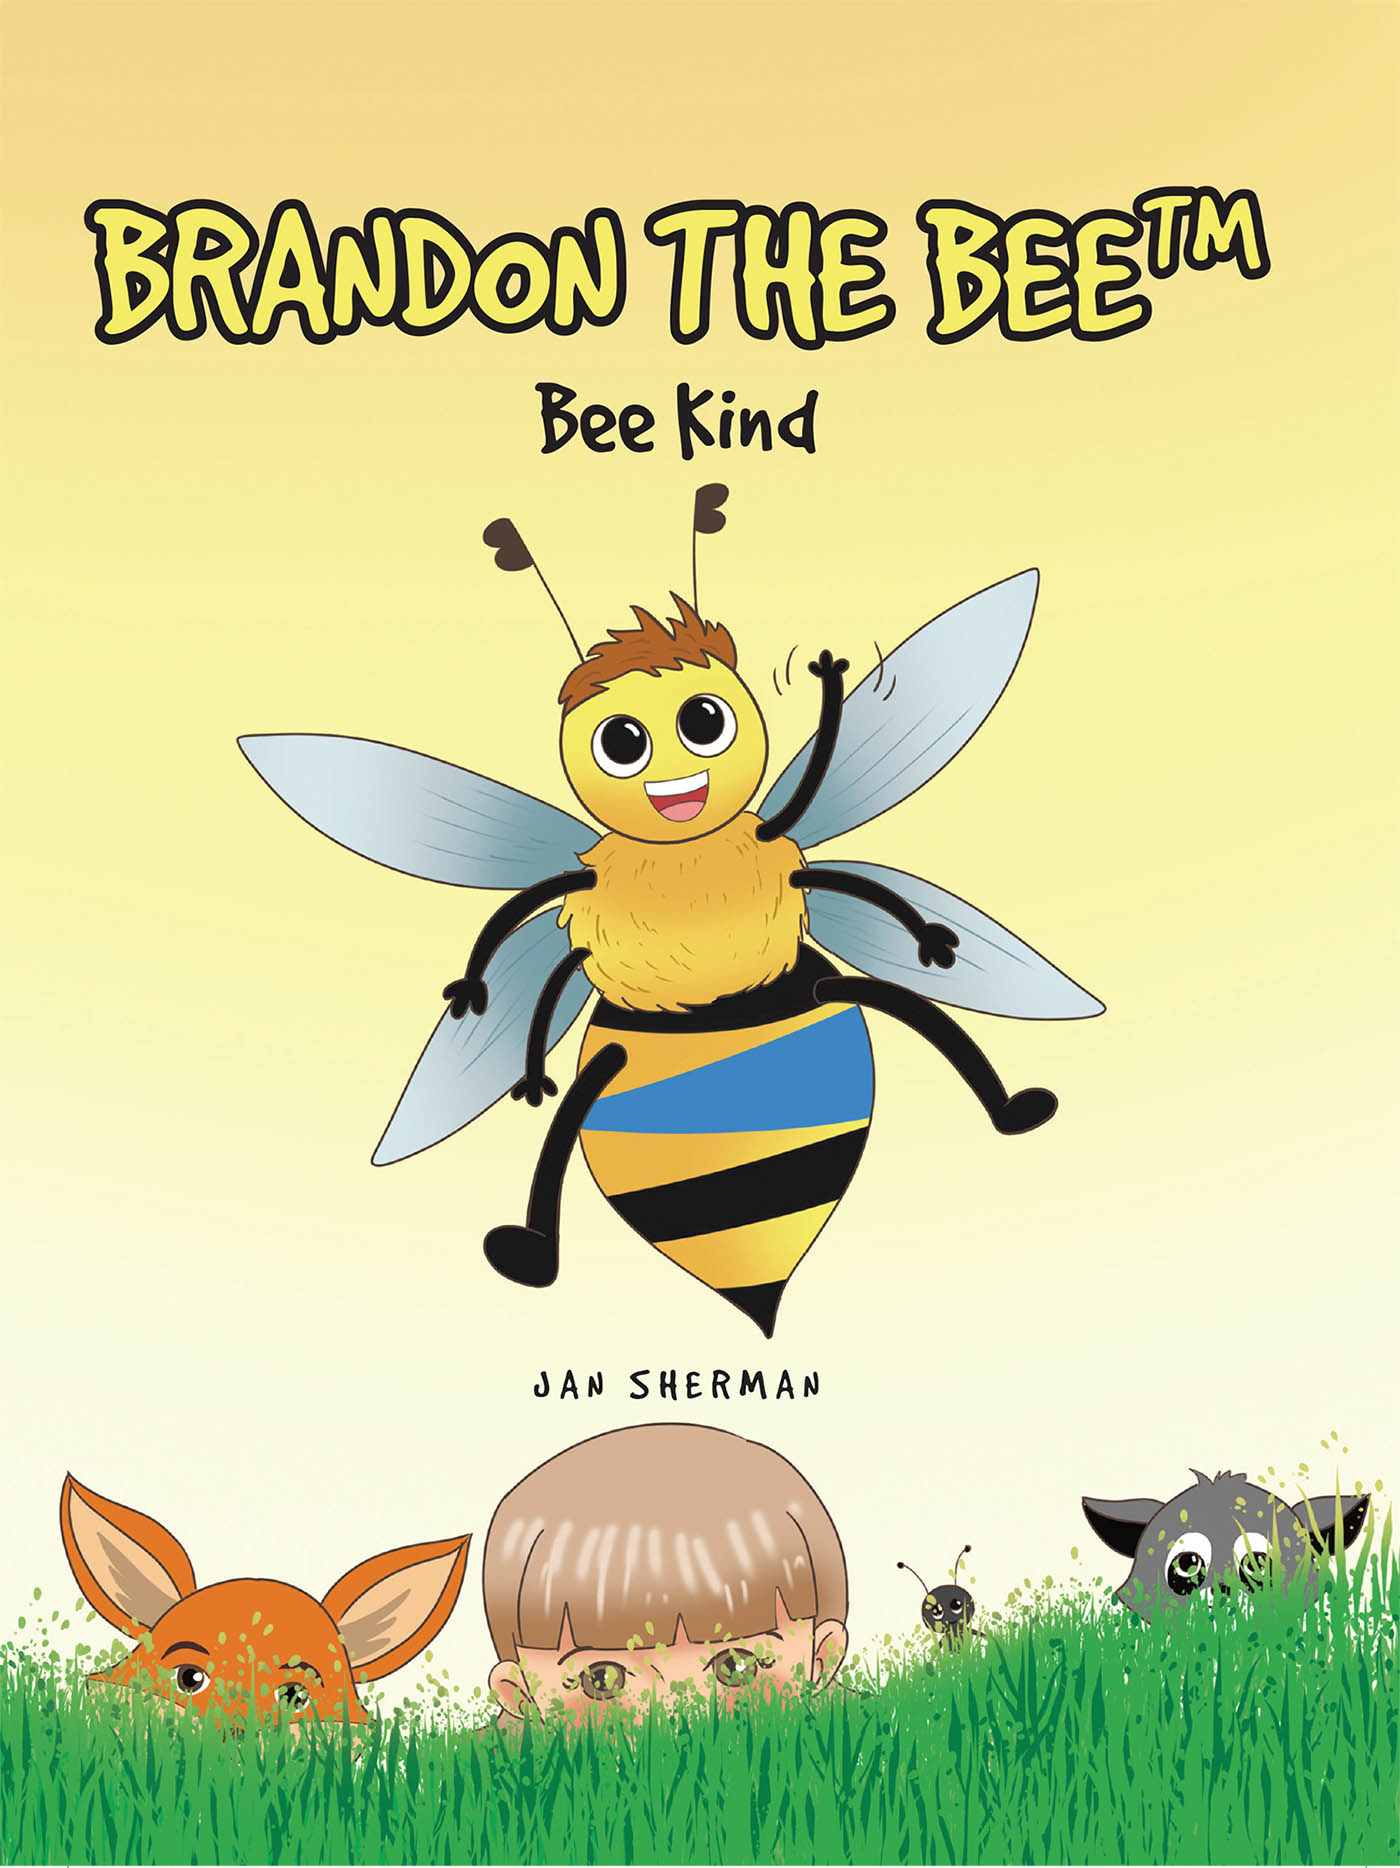 Brandon The Bee : Bee Kind Cover Image